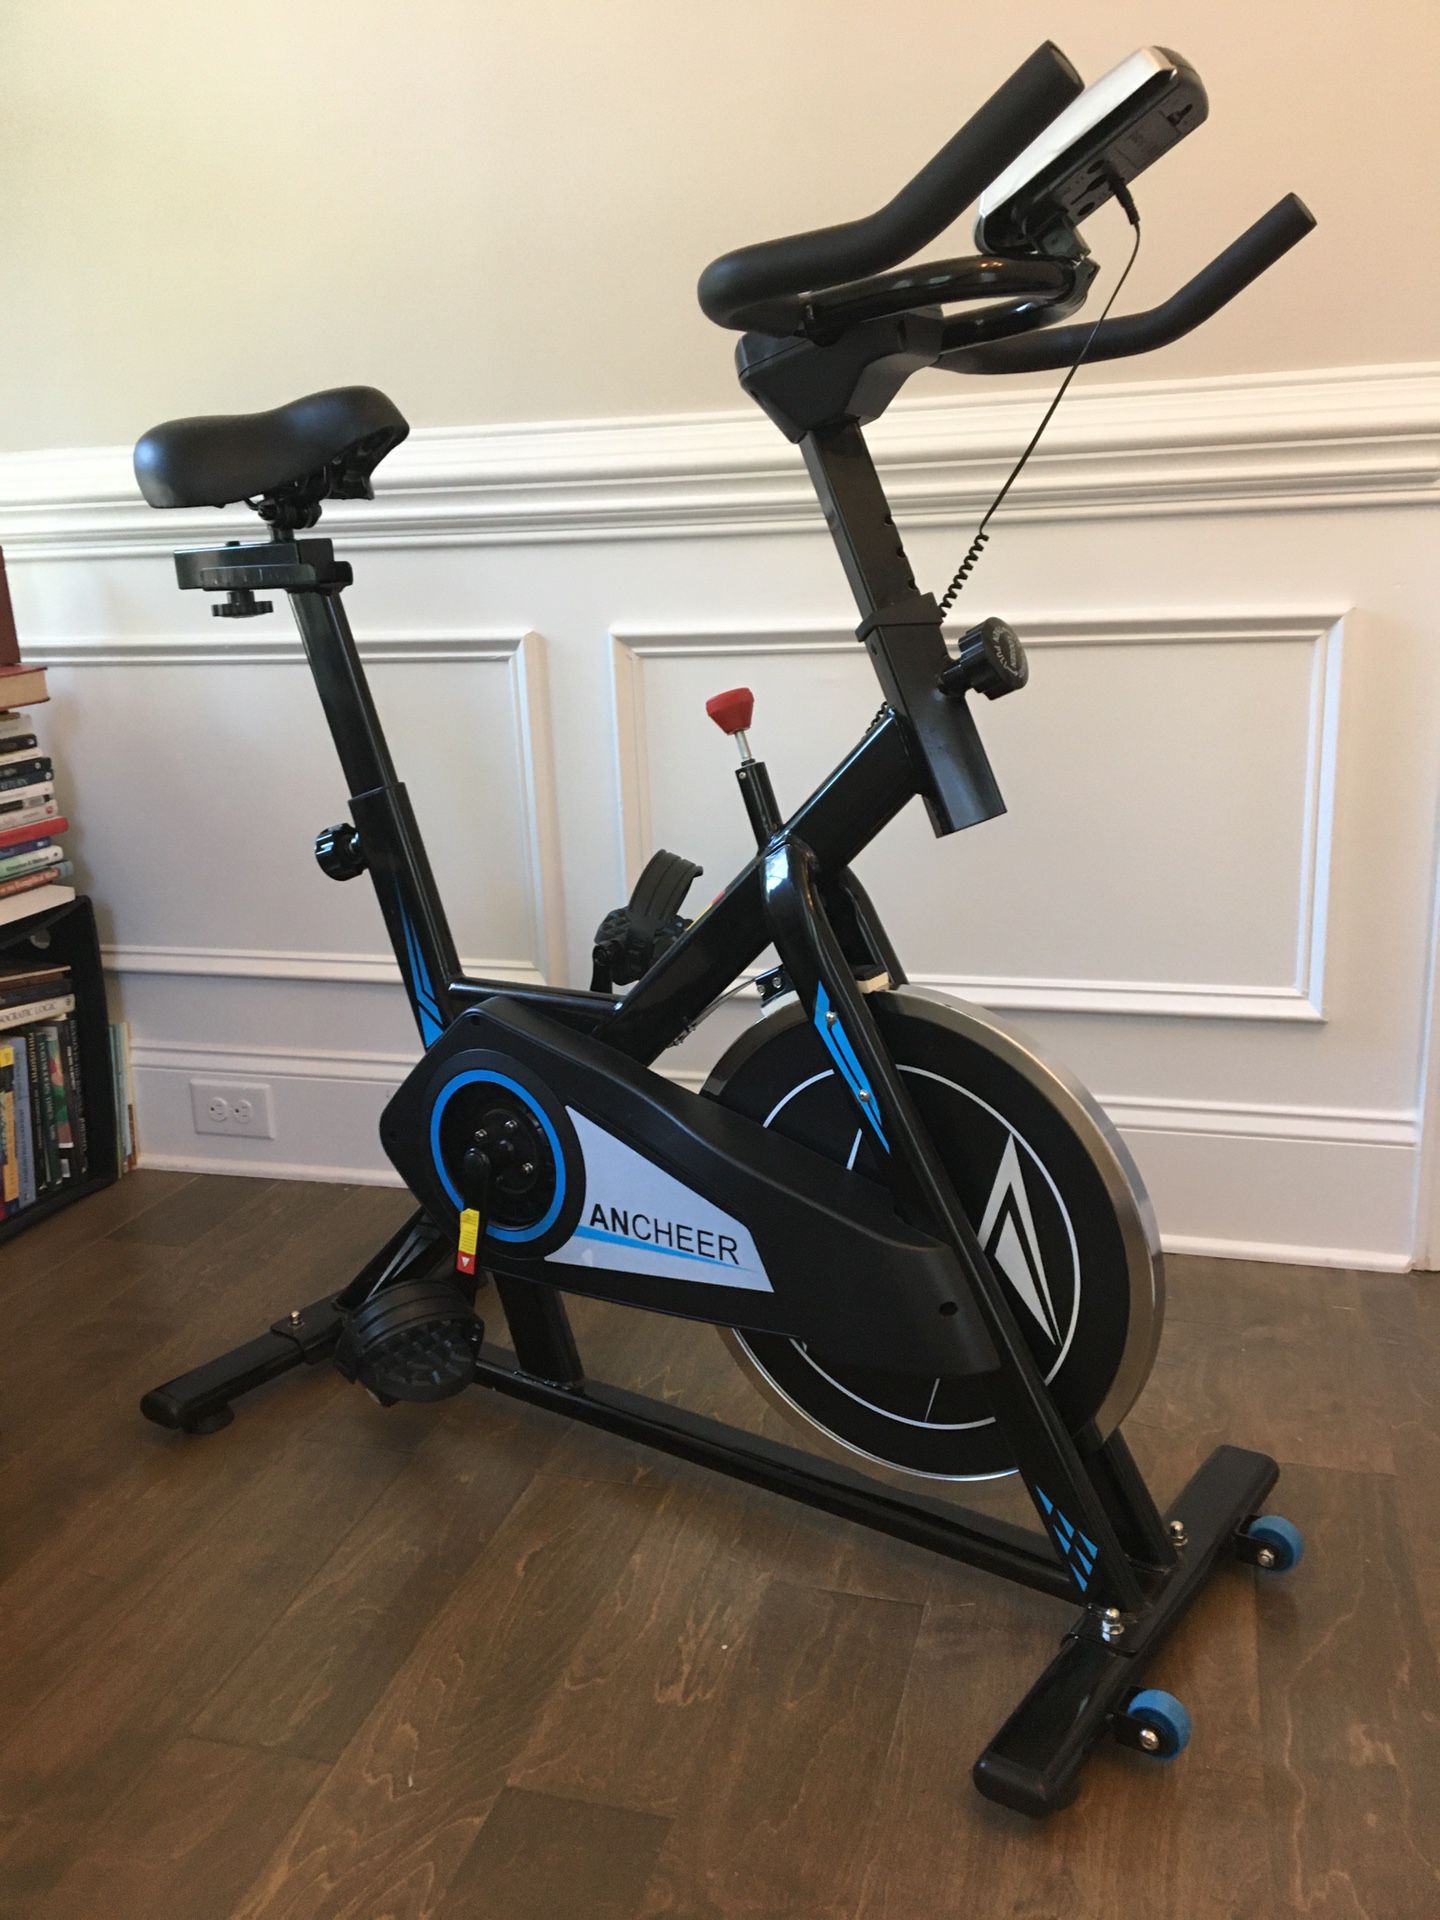 Ancheer Indoor Exercise Bike - Cycling